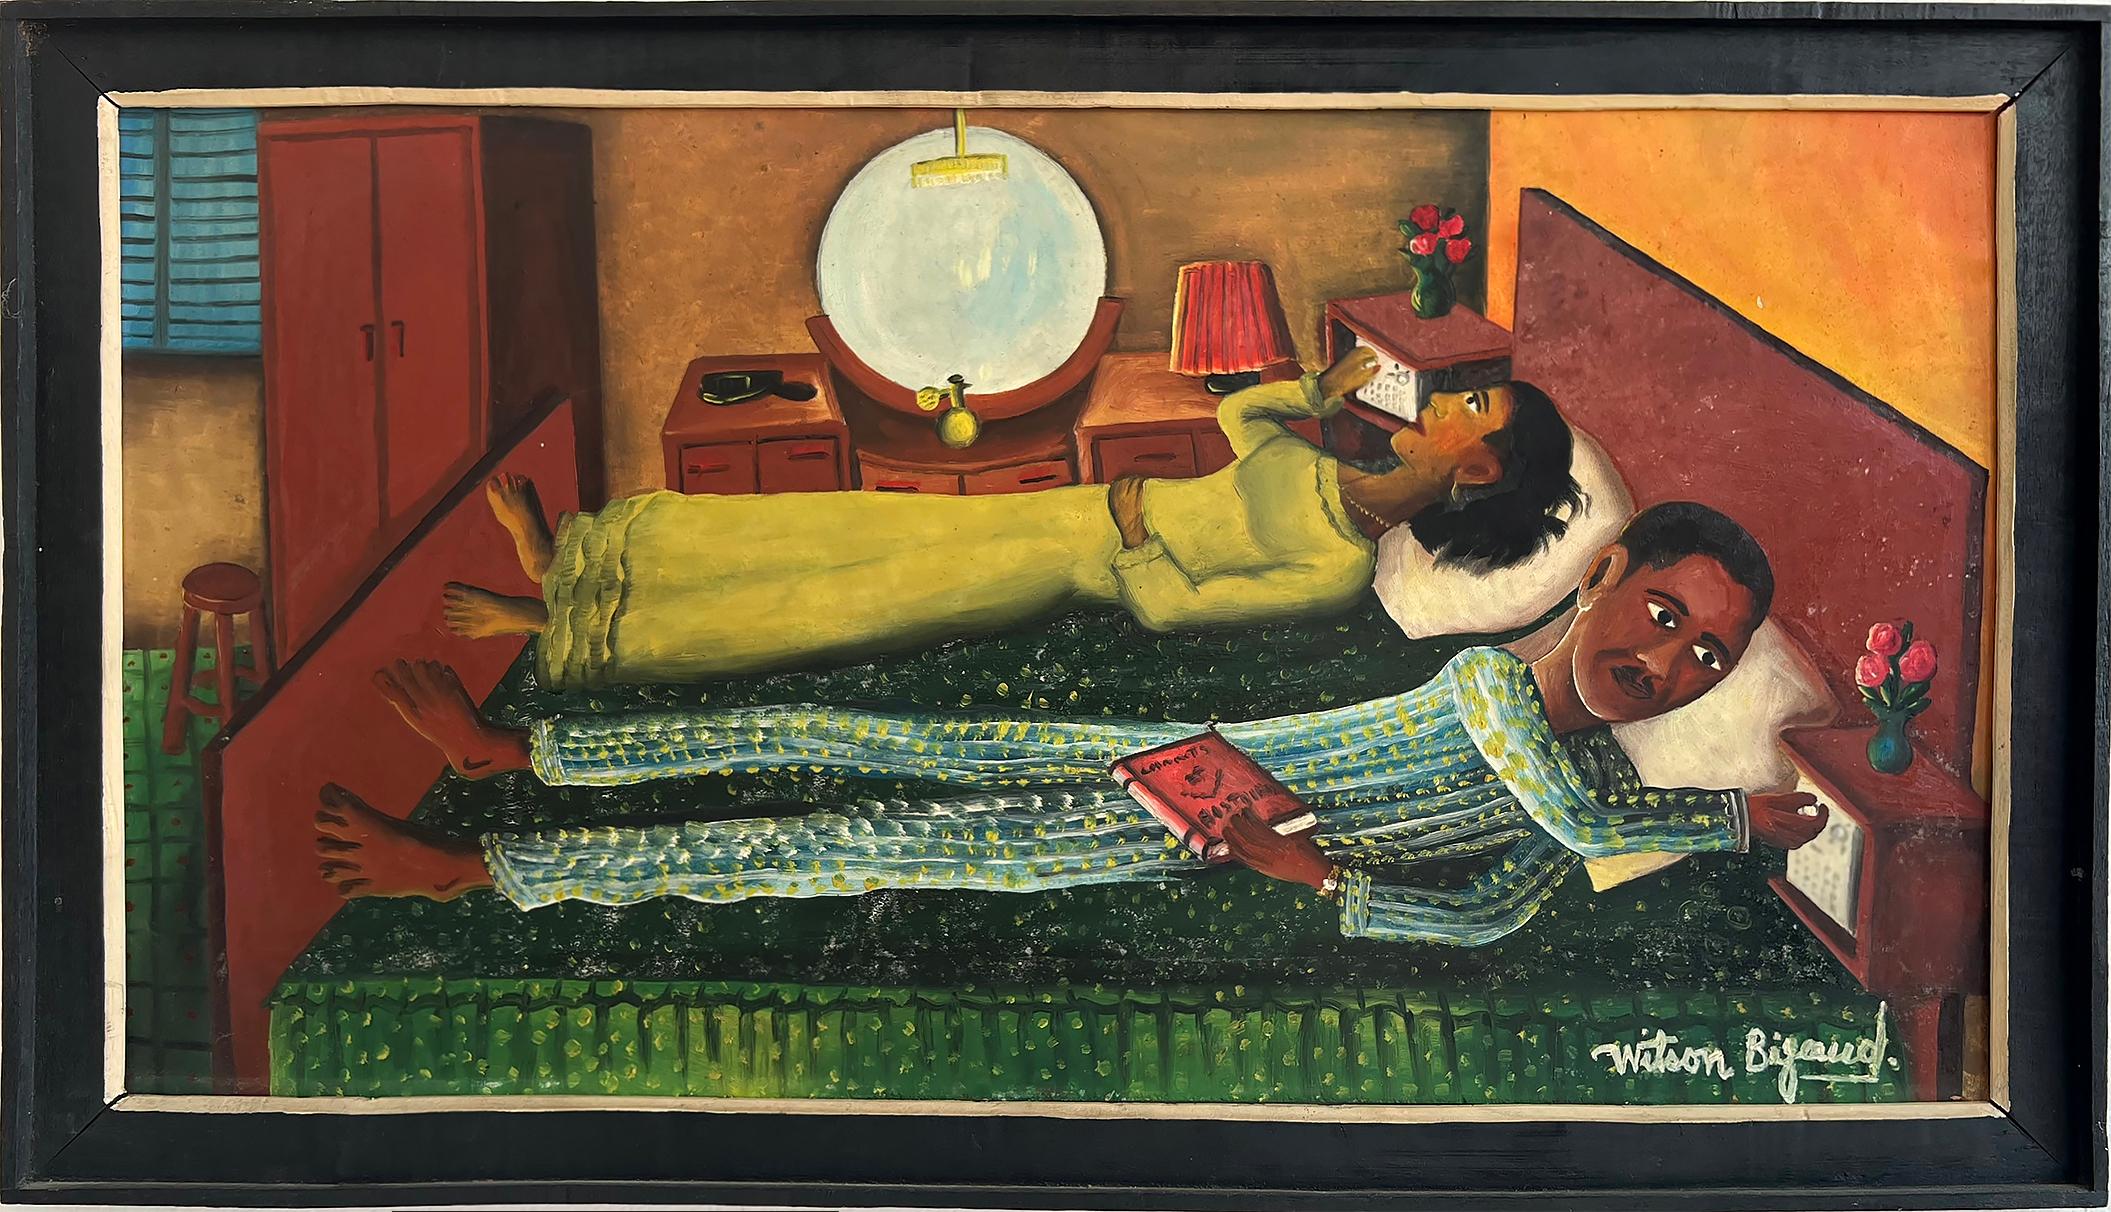 Haitian Couple in Bed Simultaneously Adjusting their Radios, Surrealism - Painting by Wilson Bigaud